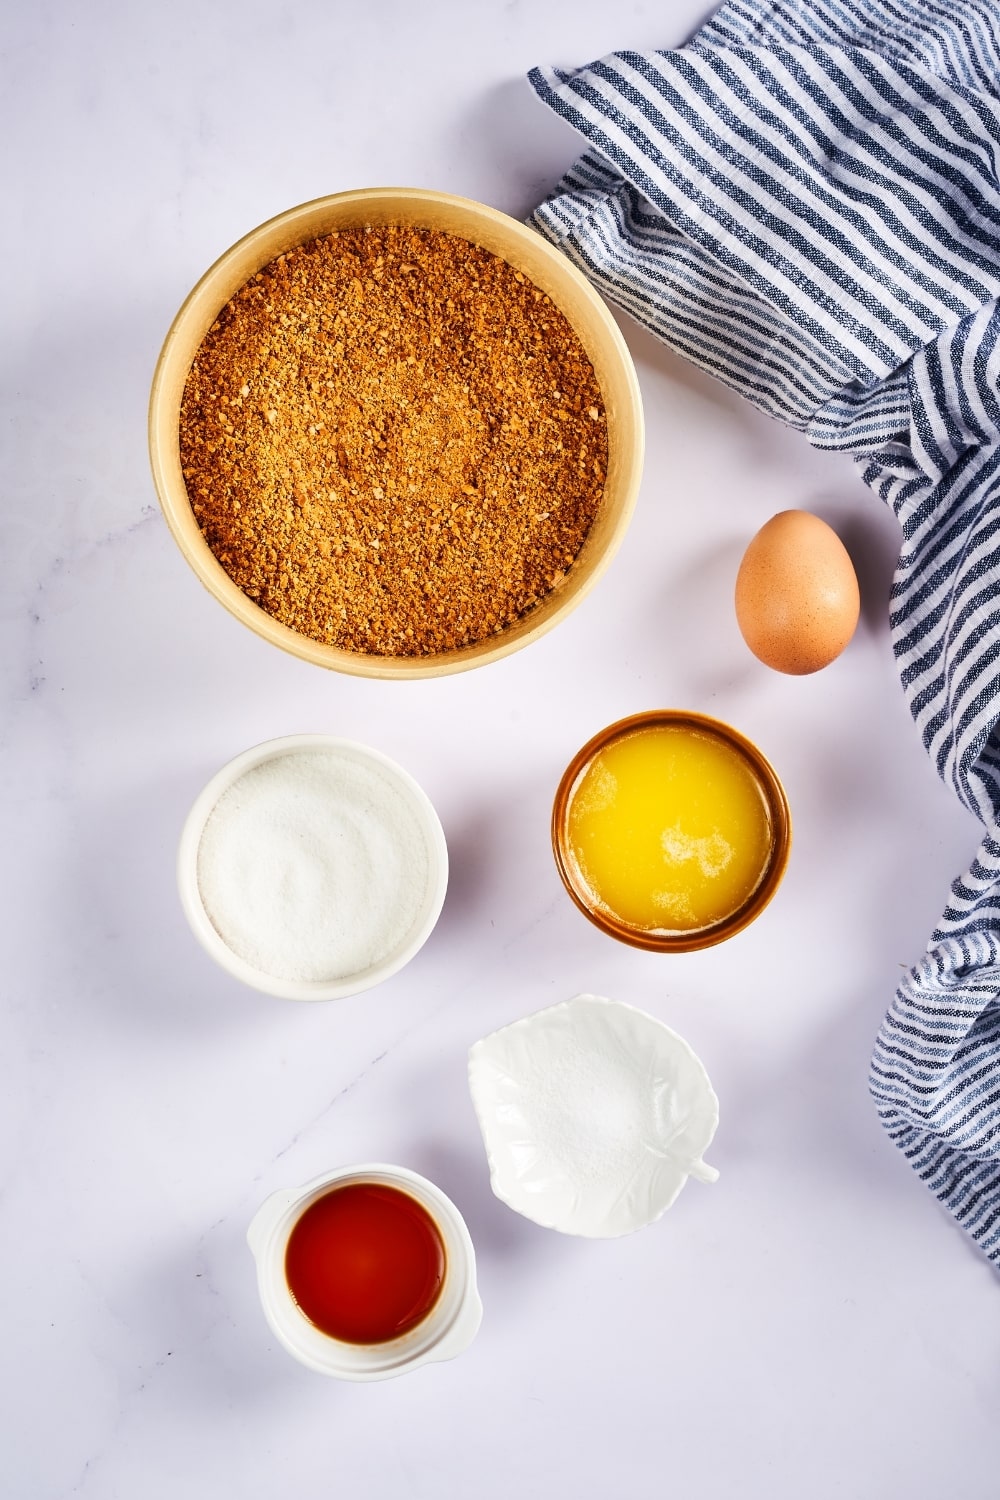 A large bowl filled with almond flour, one egg, a small bowl of melted butter, small bowl confectioners swerve, a small bowl salt, a small bowl of vanilla extract all on a white counter.